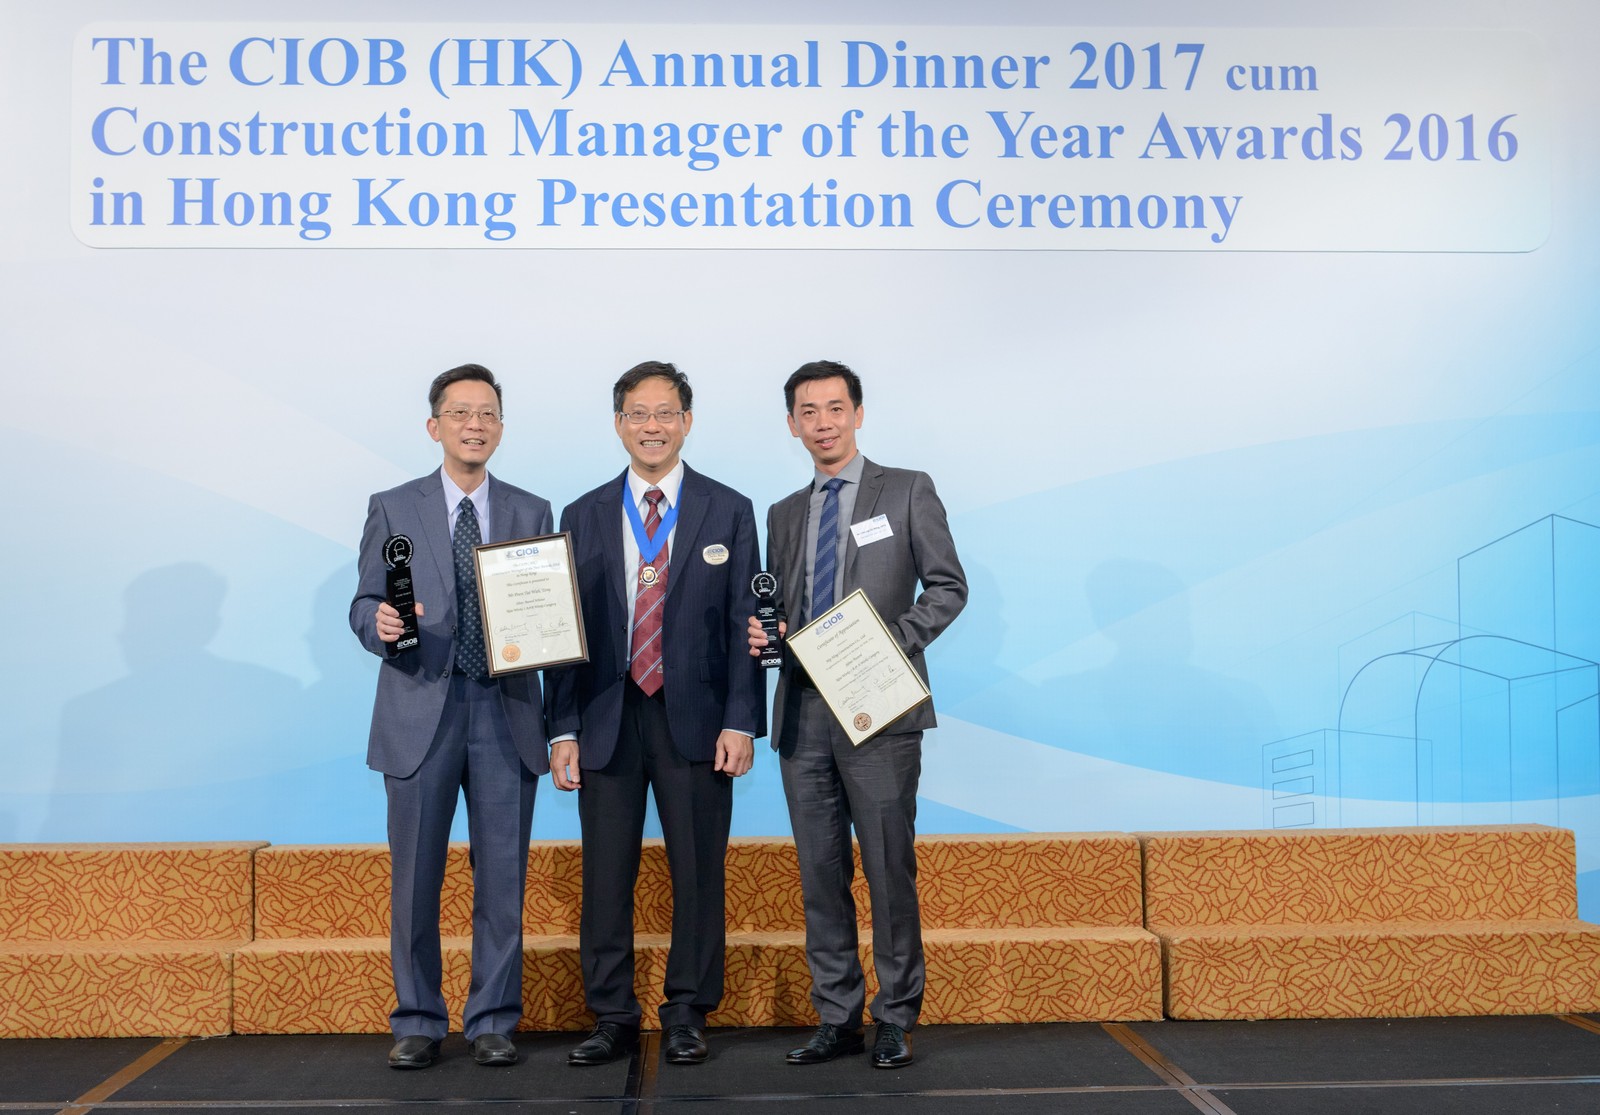 Mr Tony Poon(Left), Senior Project Manager of Hip Hing and Mr Larry Cheung(Right), Project Manager of Hip Hing are named Construction Manager of the Year